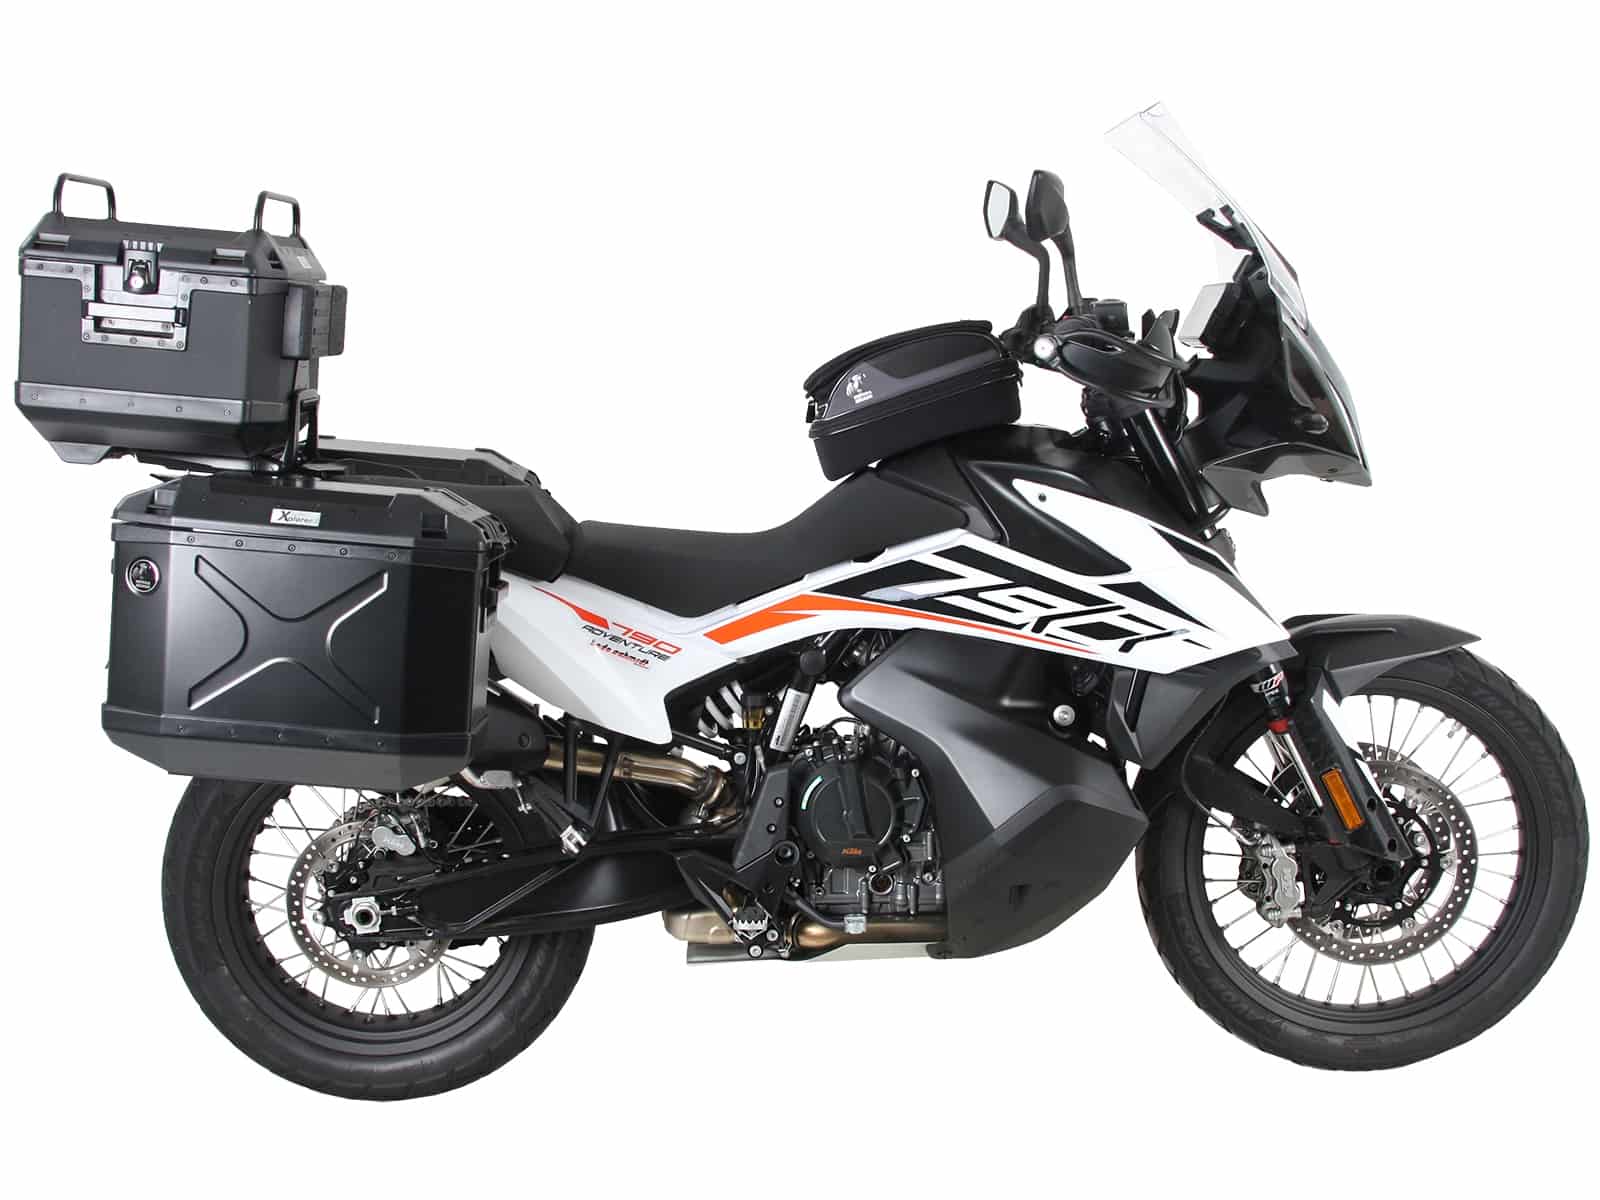 Sidecarrier Cutout stainless steel incl. Xplorer sideboxes black for KTM 790 Adventure/R (2019-)